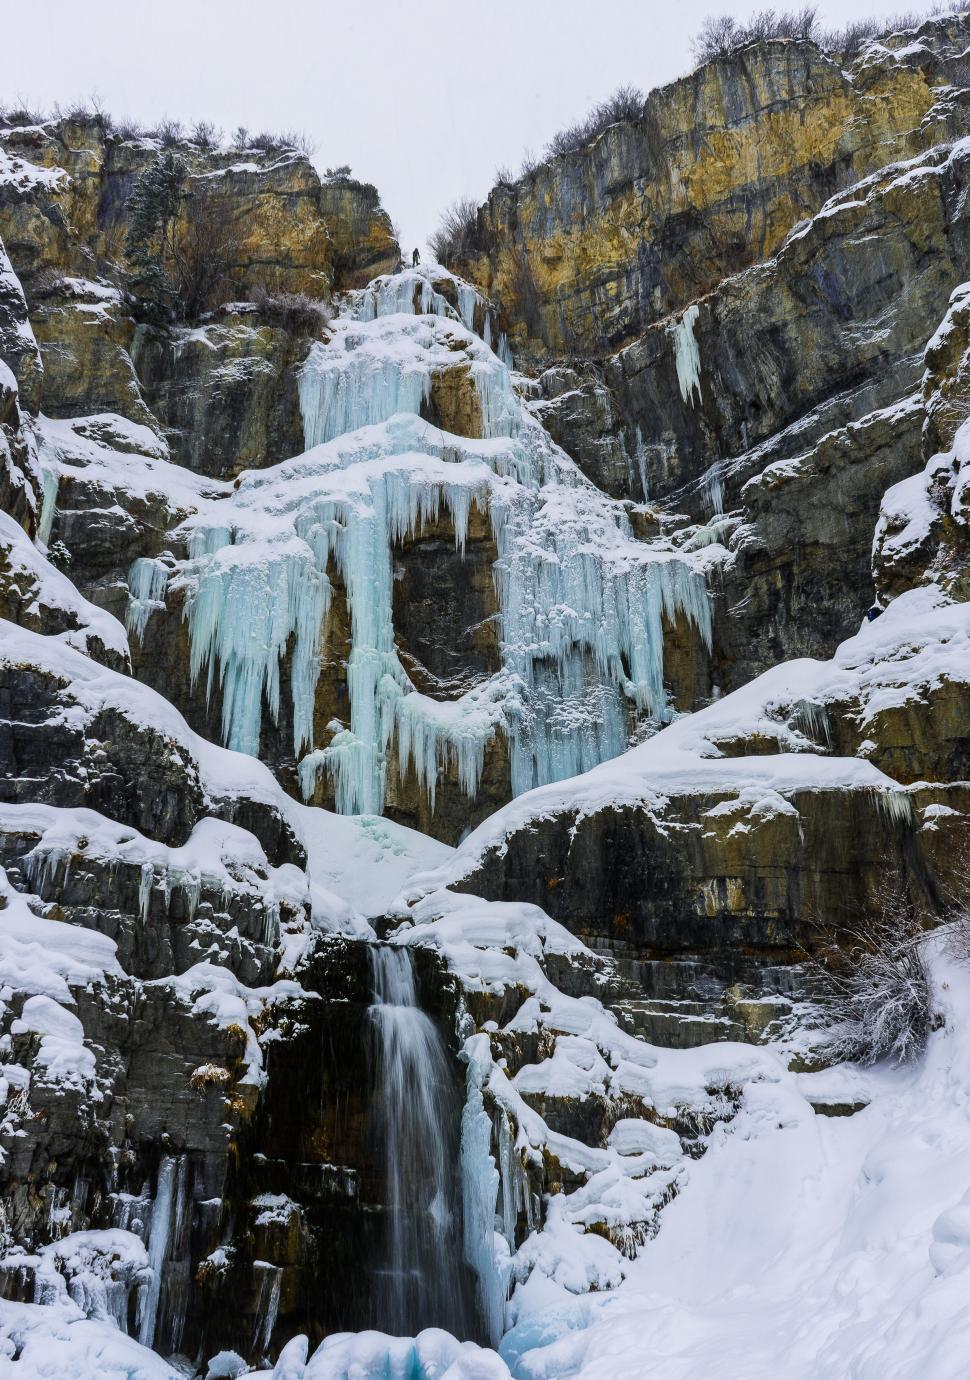 Free Image of Frozen Waterfall With Ice Formation 